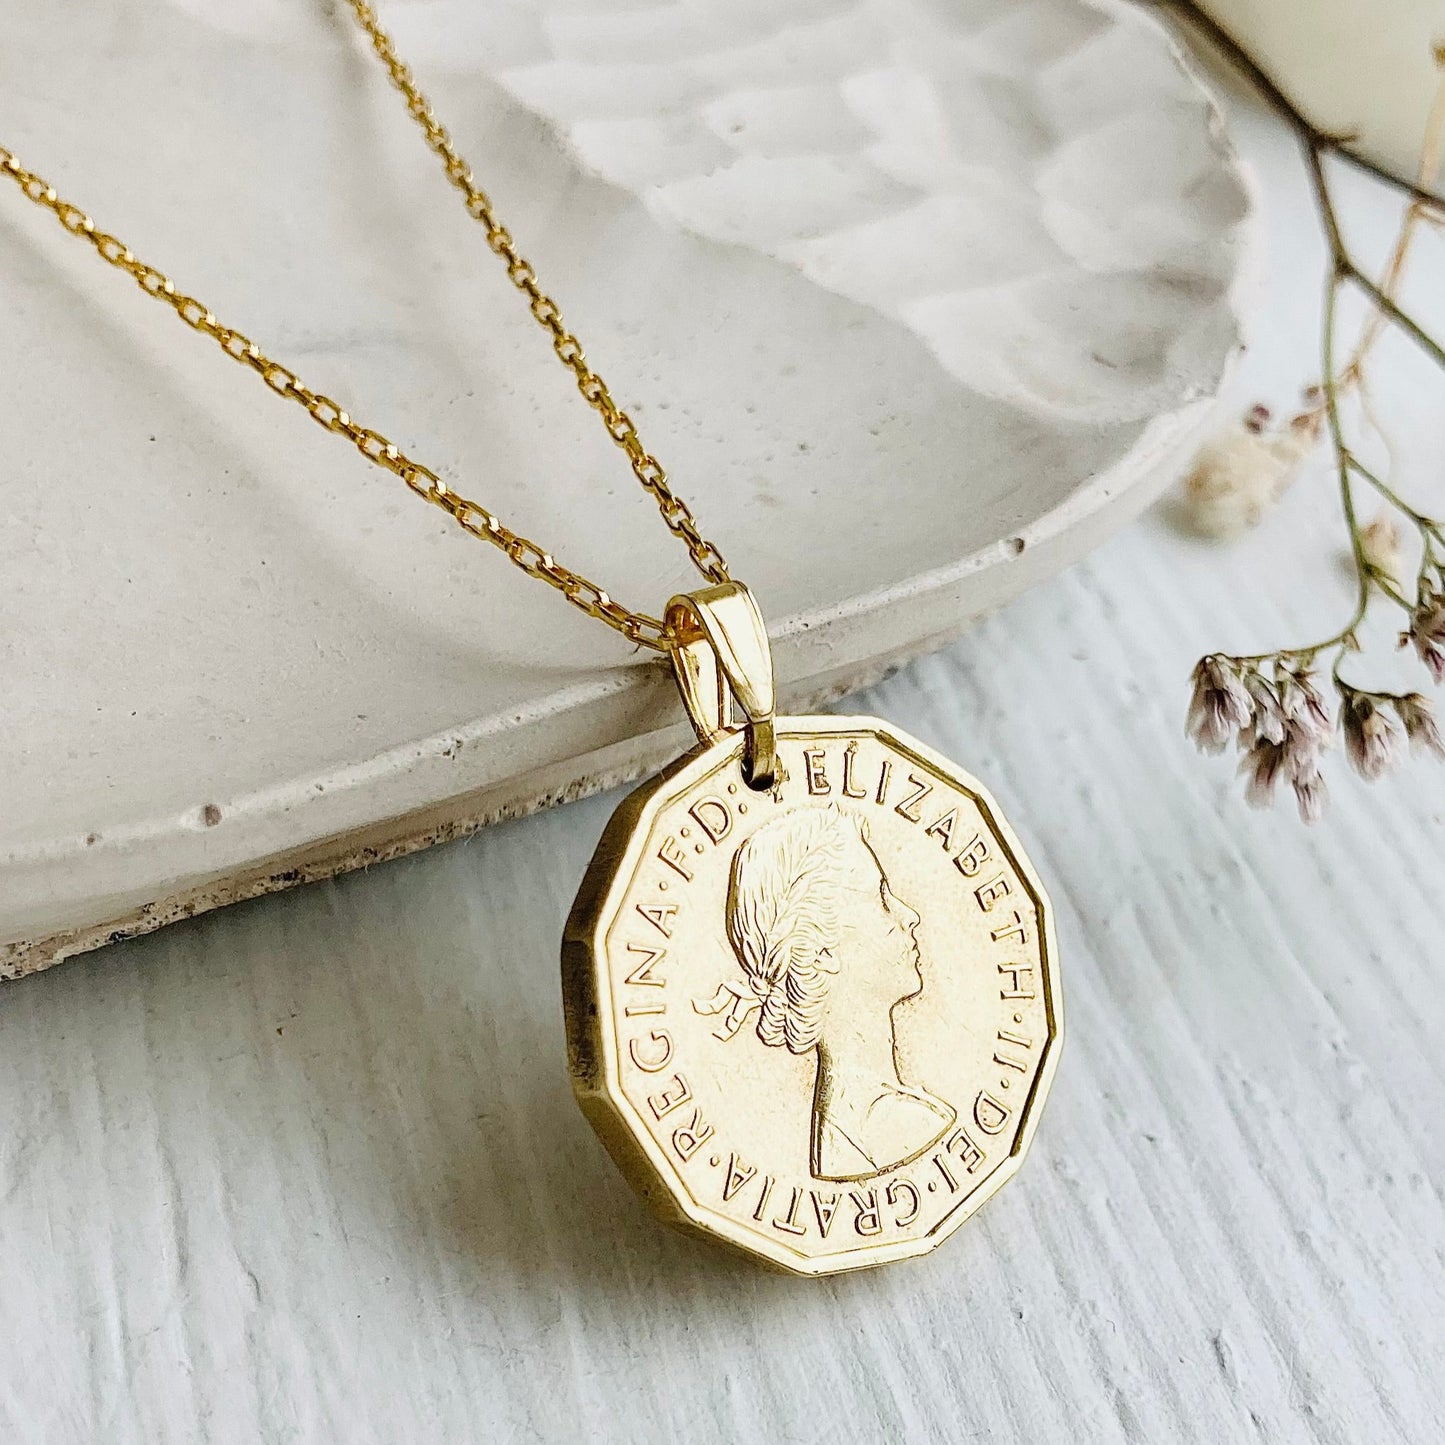 Gold coin pendant necklace made in the UK by Prenoa - 60th birthday